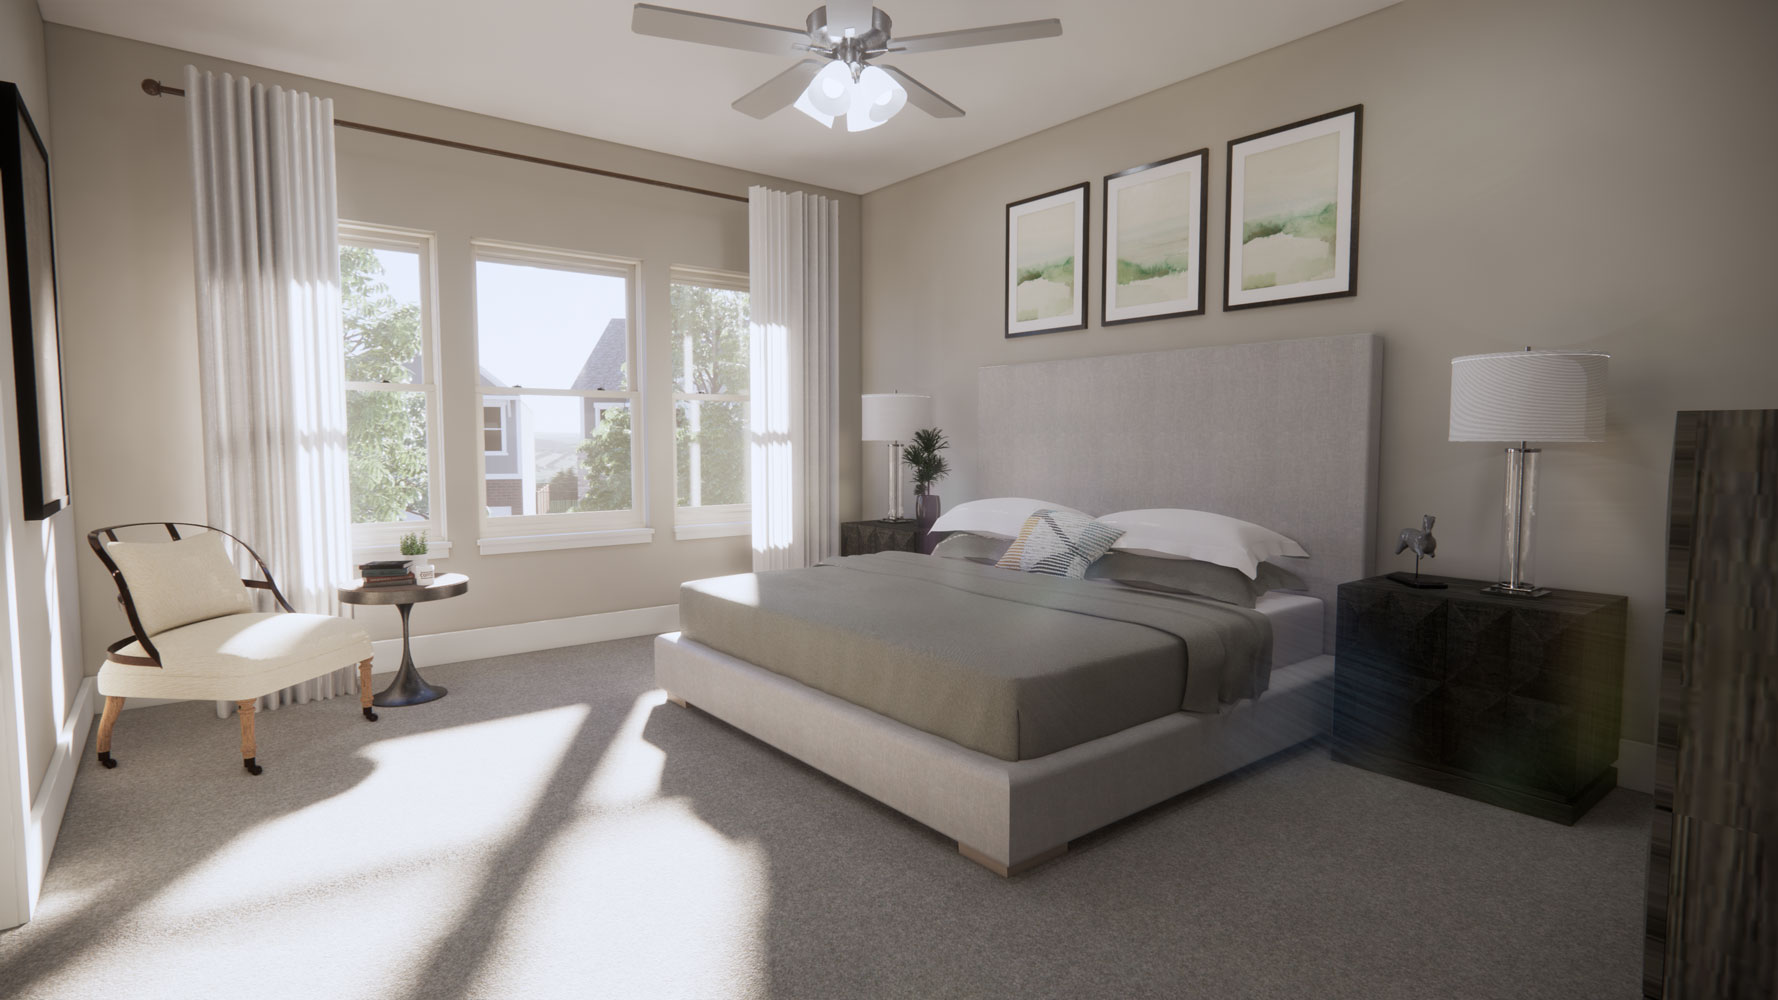 Bedroom with Ceiling Fan at Echelon at Reverchon Bluffs in Dallas, Texas